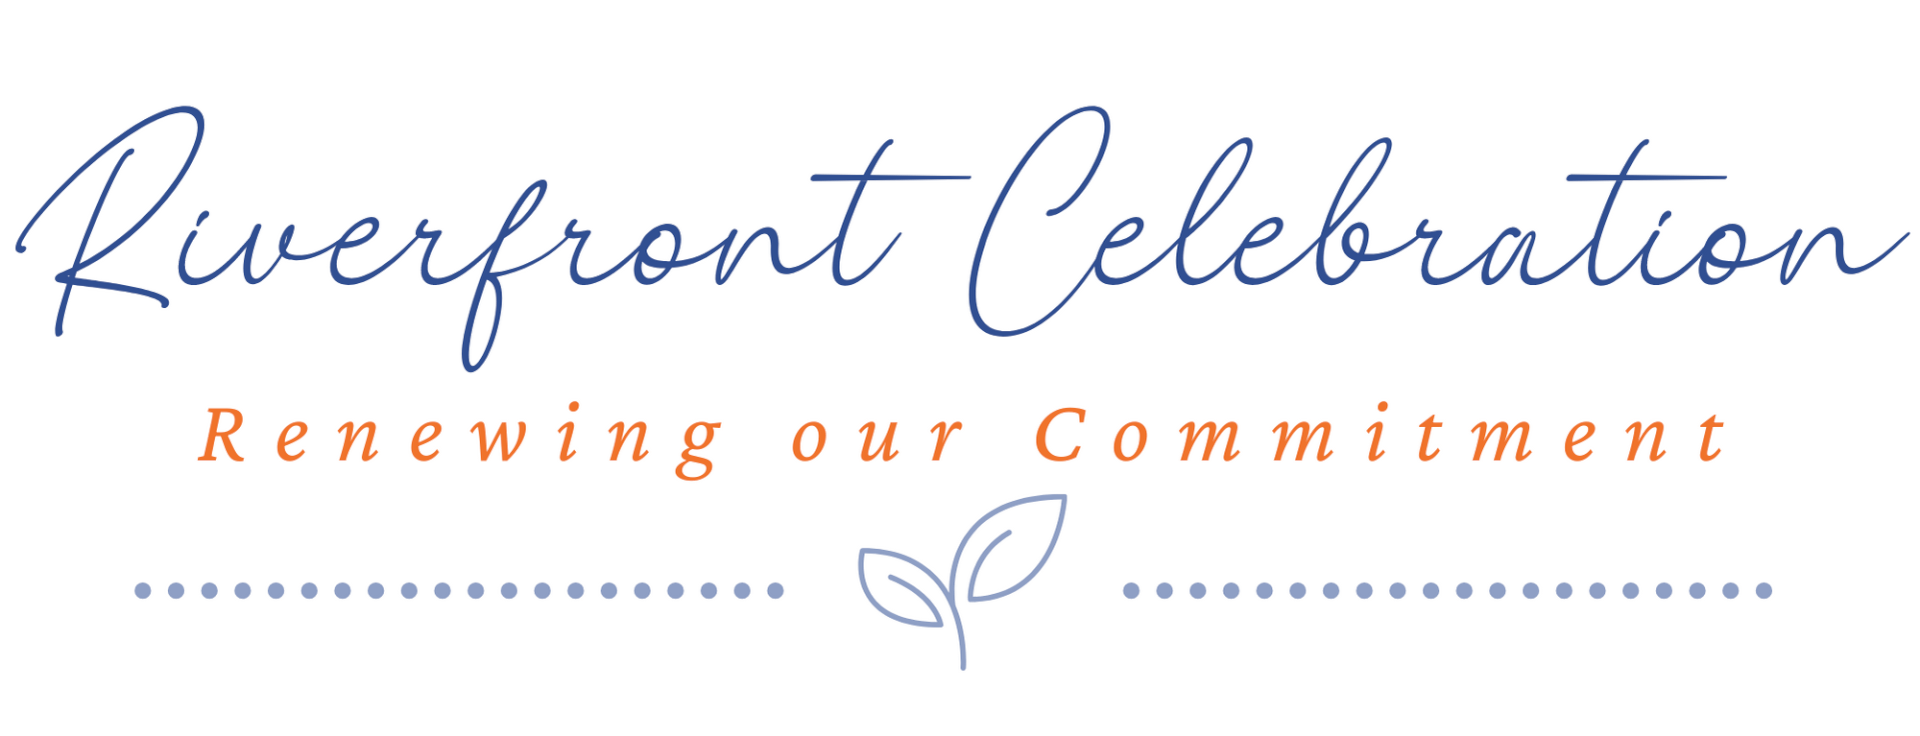 ID: Dark blue cursive text that says "Riverfront Celebration". Beneath that is dark orange text that says, "Renewing our Commitment". Lastly, at the bottom is a line of light blue dots with a graphic of a drawn sprout in the center. End ID.